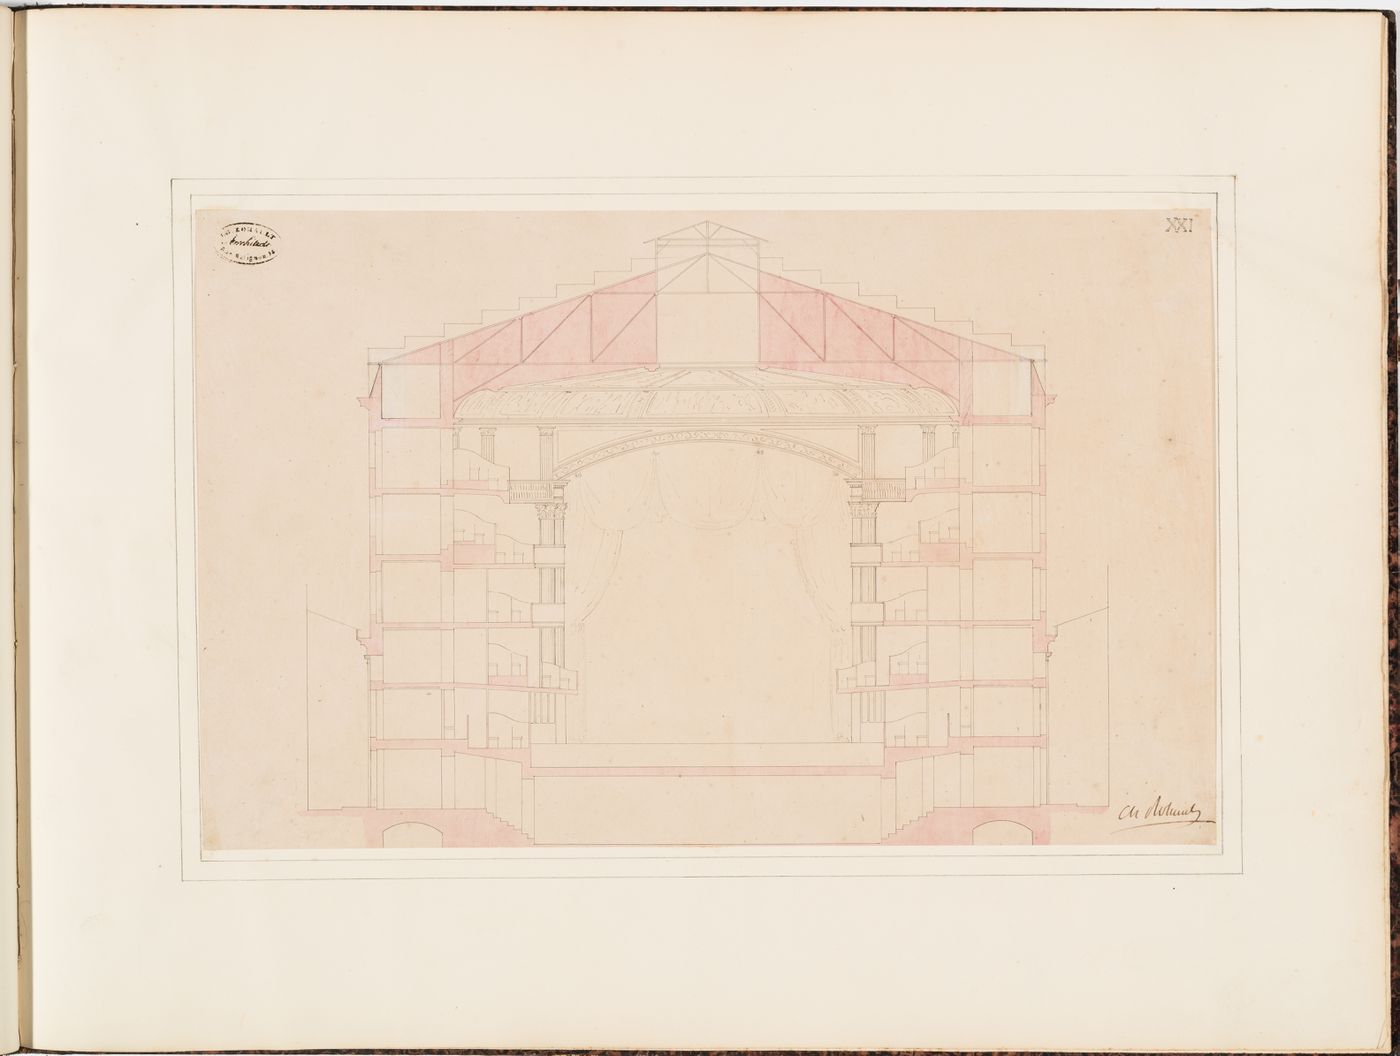 Cross section for the Théâtre Royal Italien, showing the stage and the "planchers de la salle"